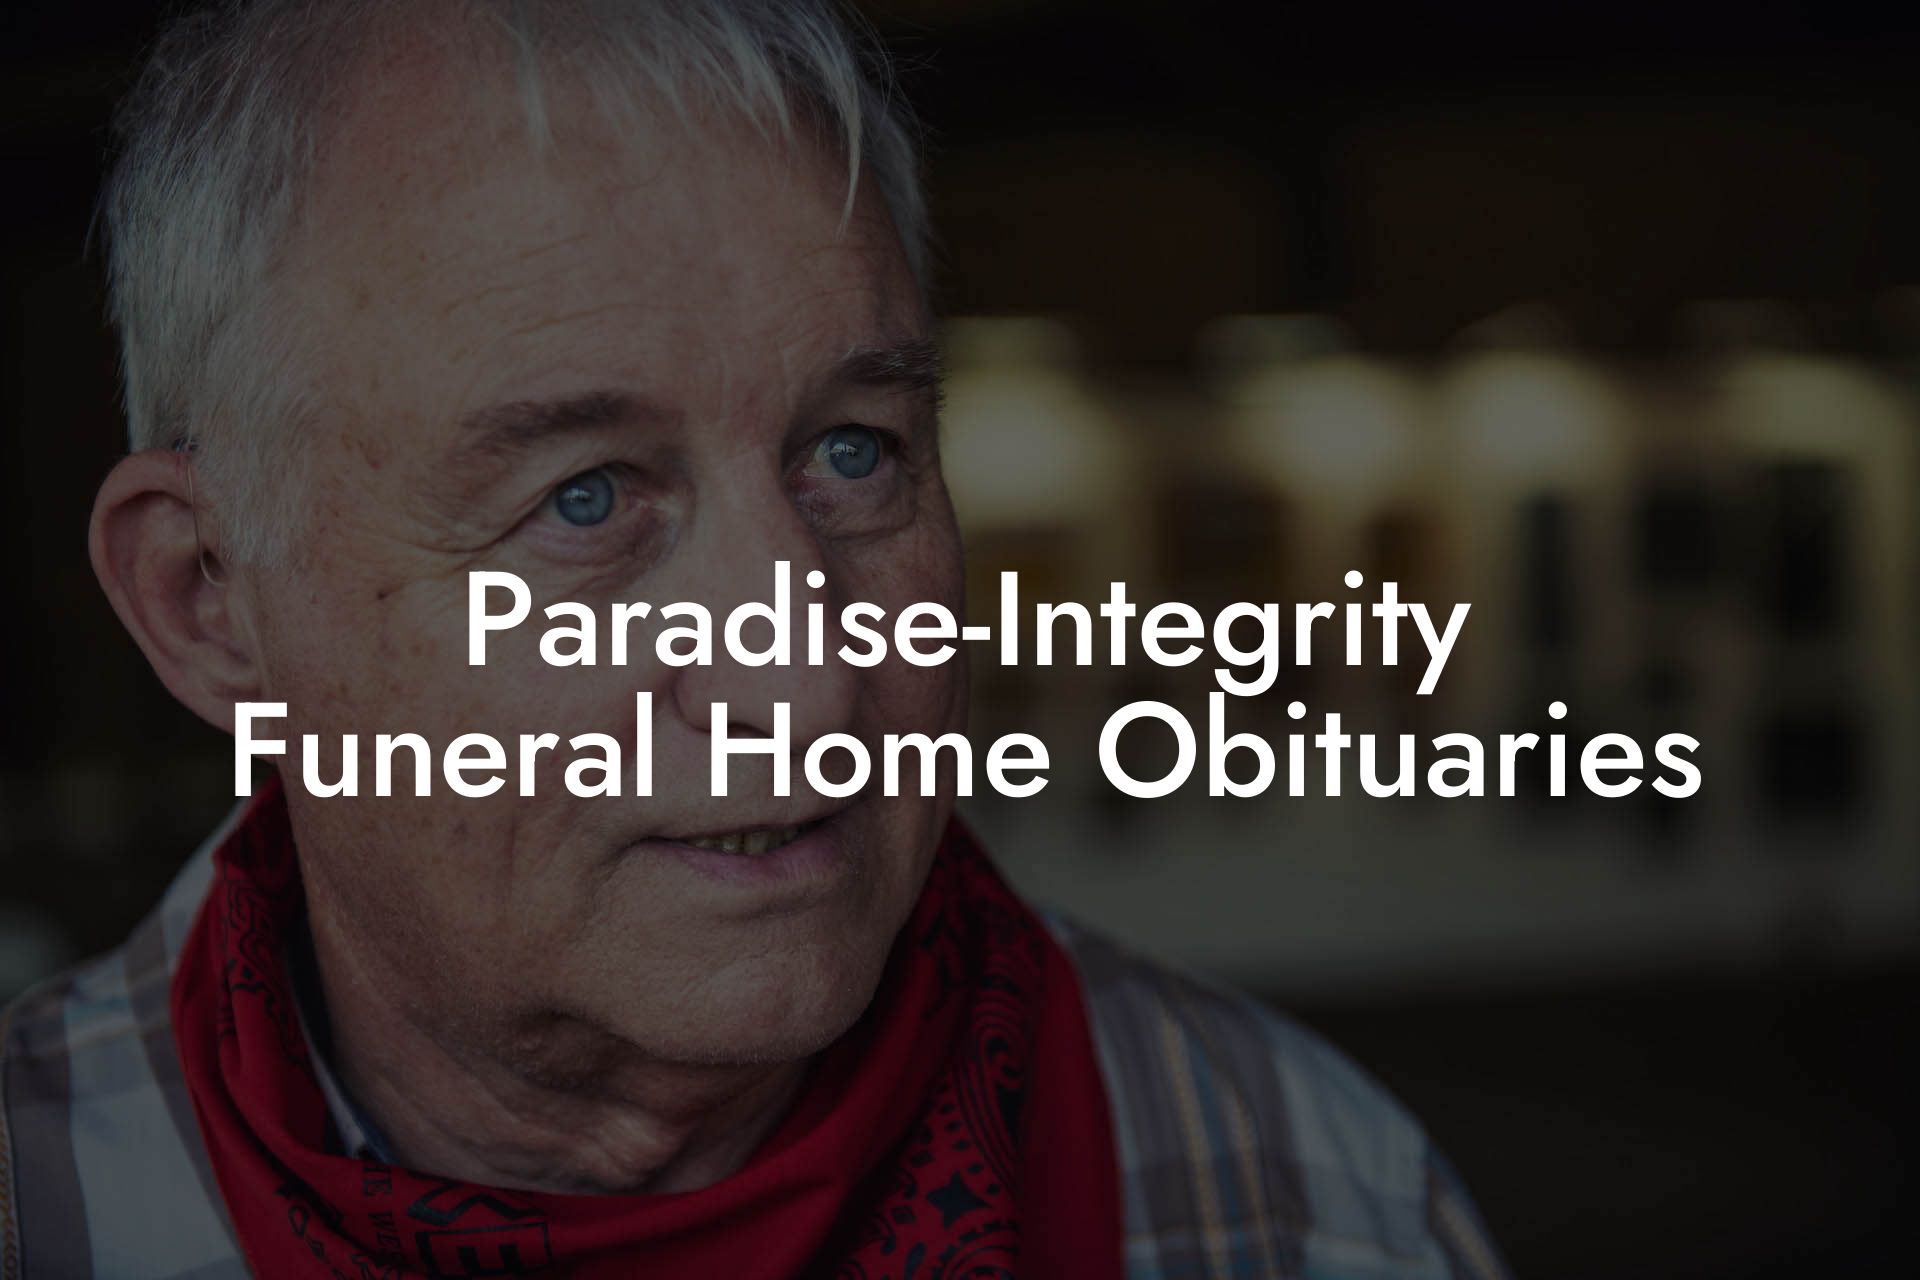 Paradise-Integrity Funeral Home Obituaries